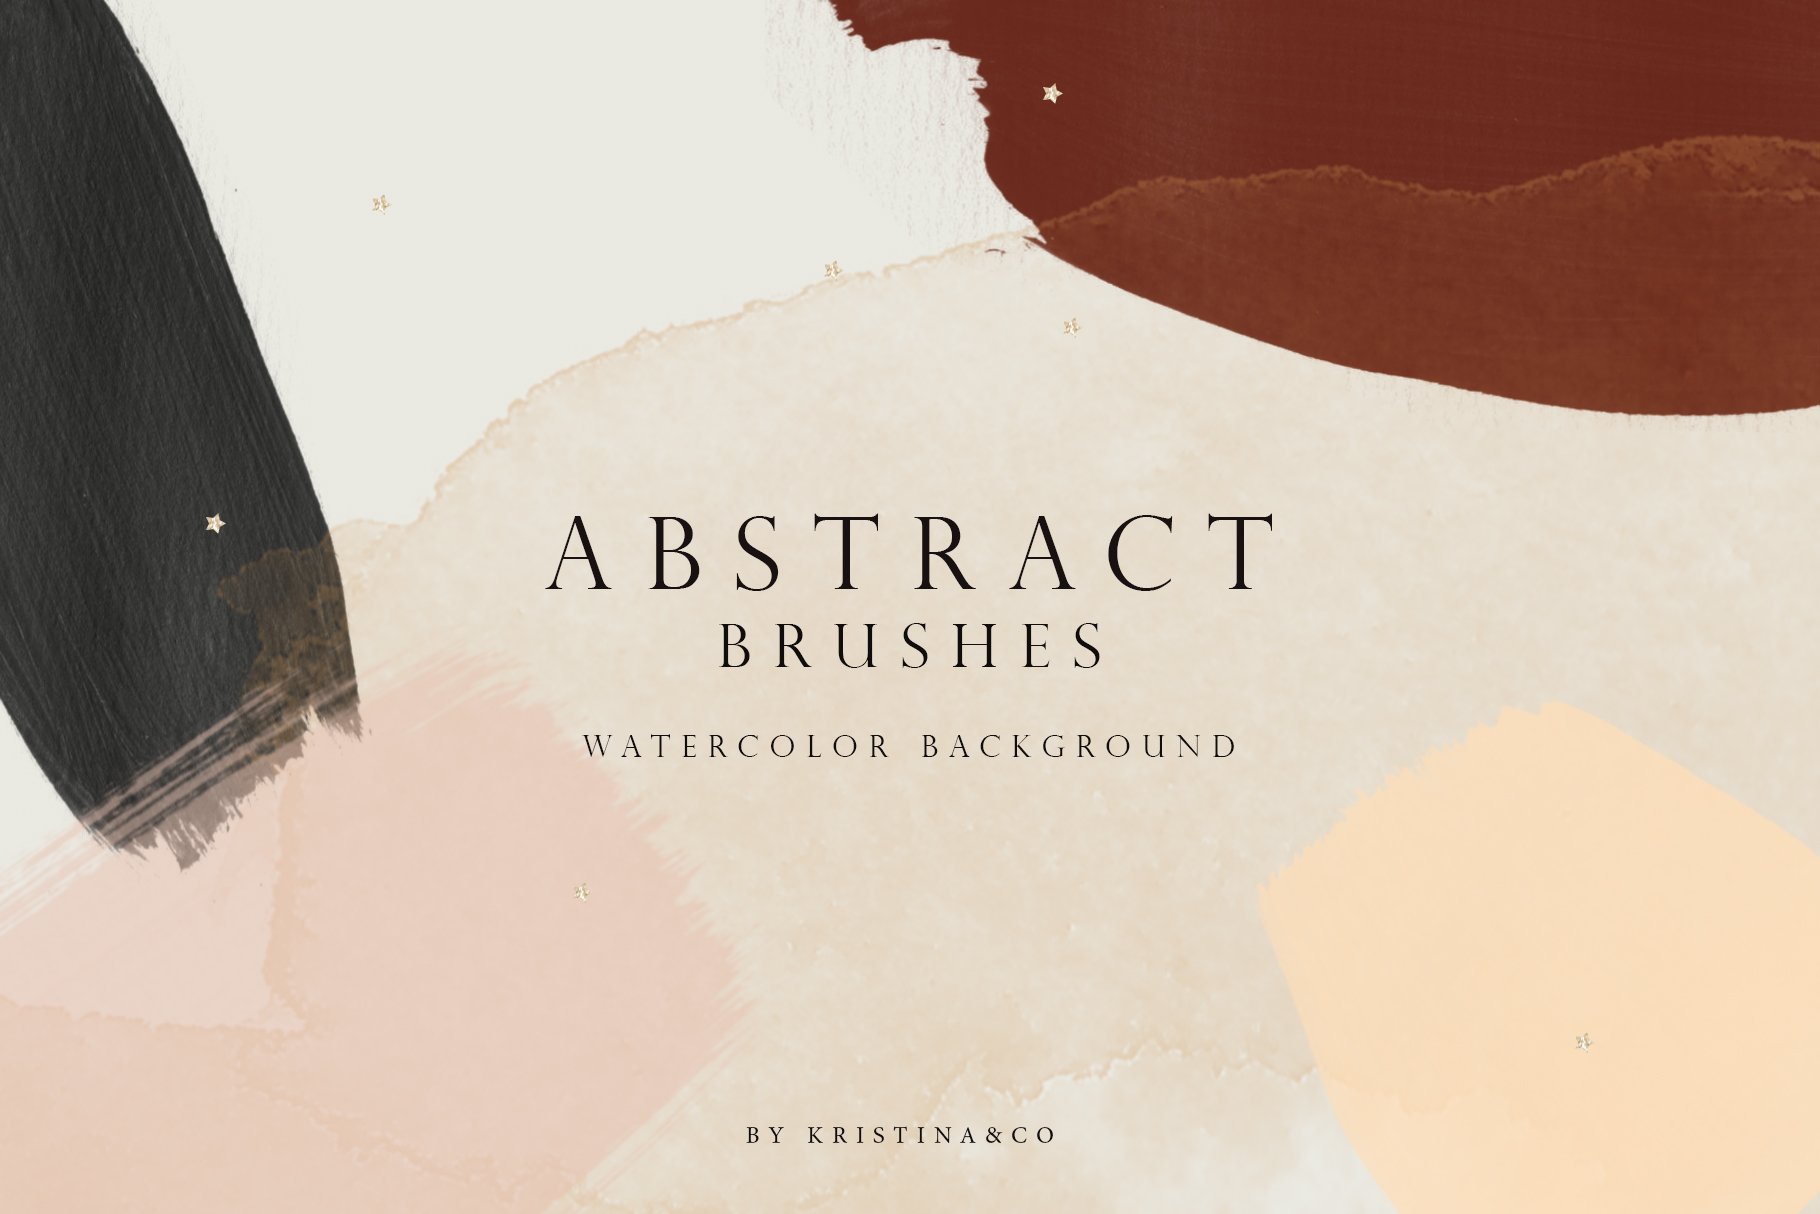 Abstract Brushes